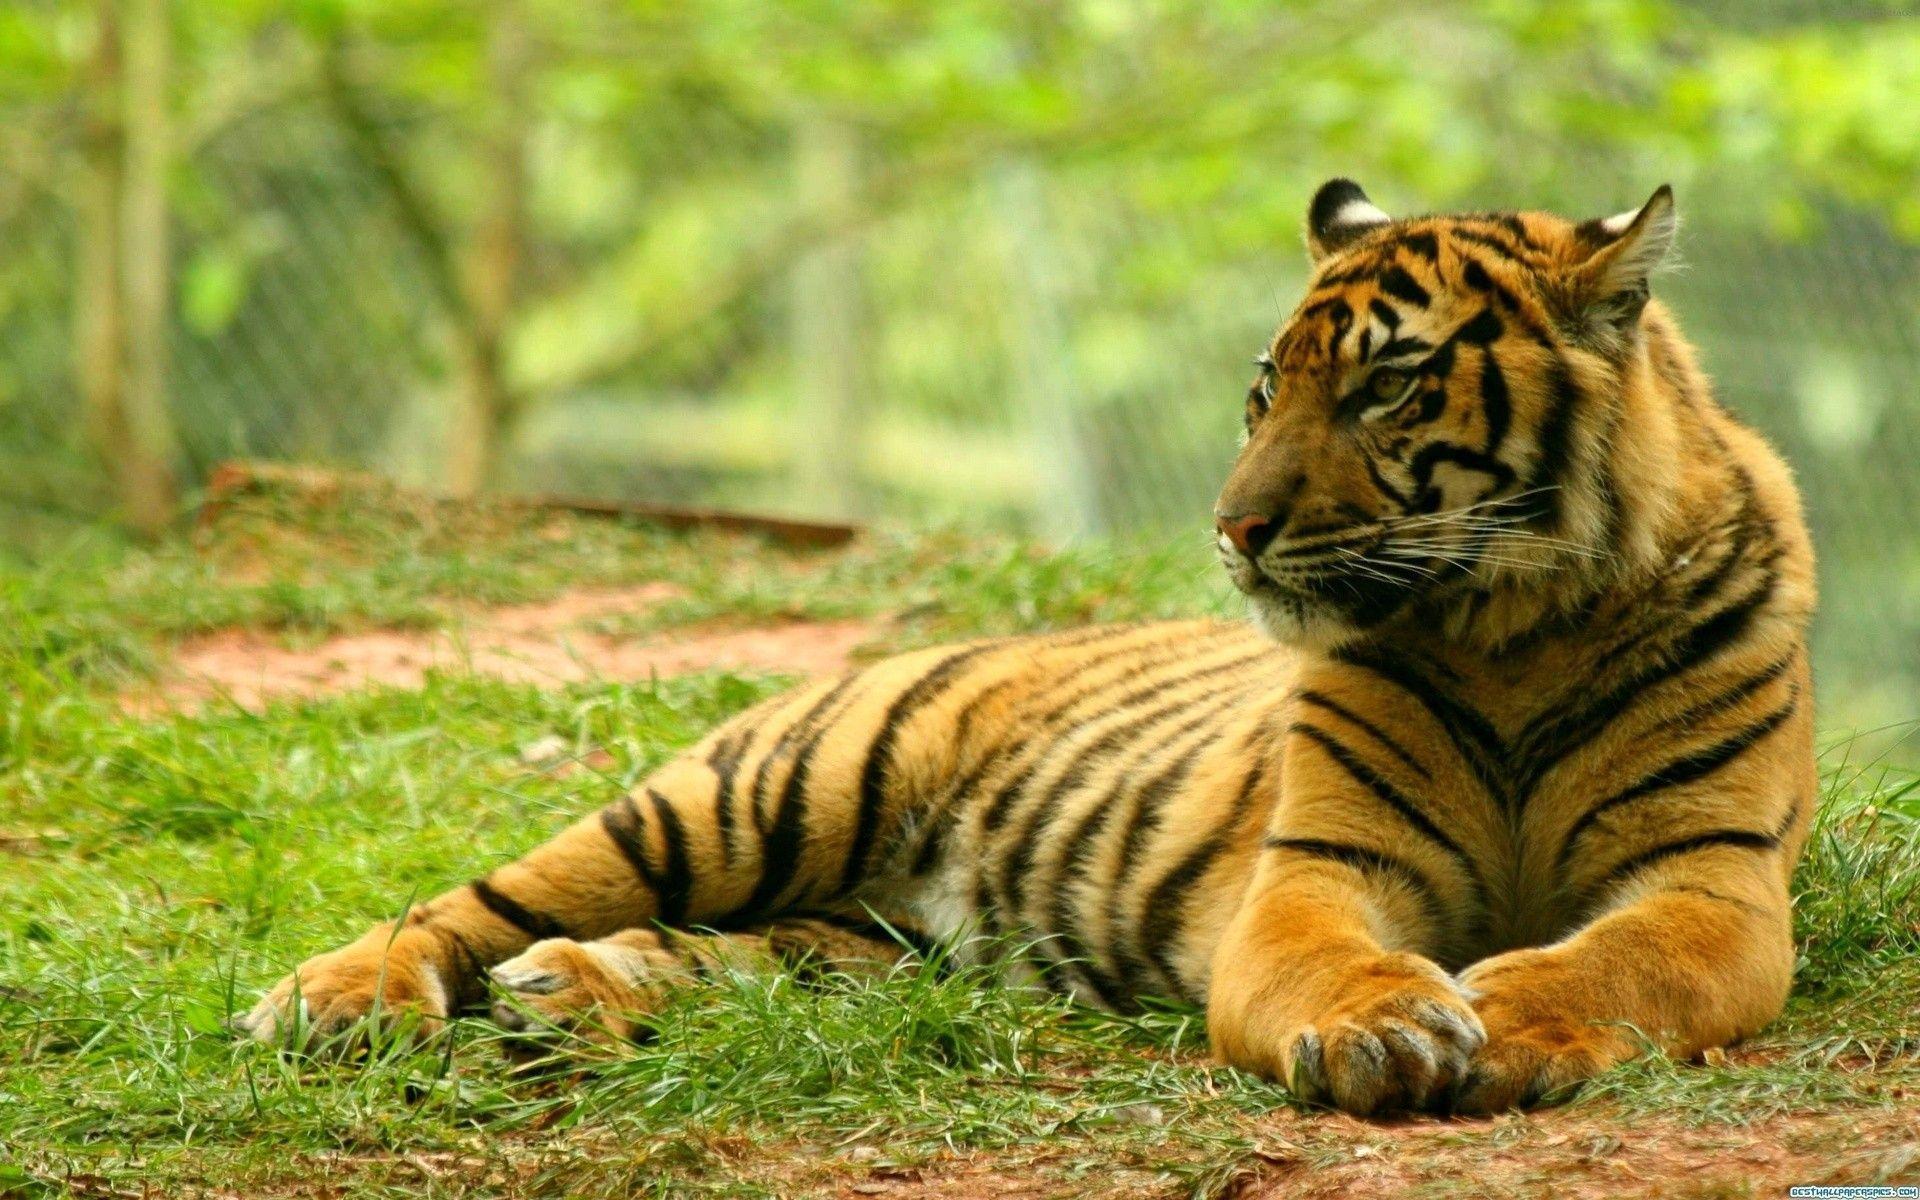 Tiger Forest Wallpapers - Top Free Tiger Forest Backgrounds ...